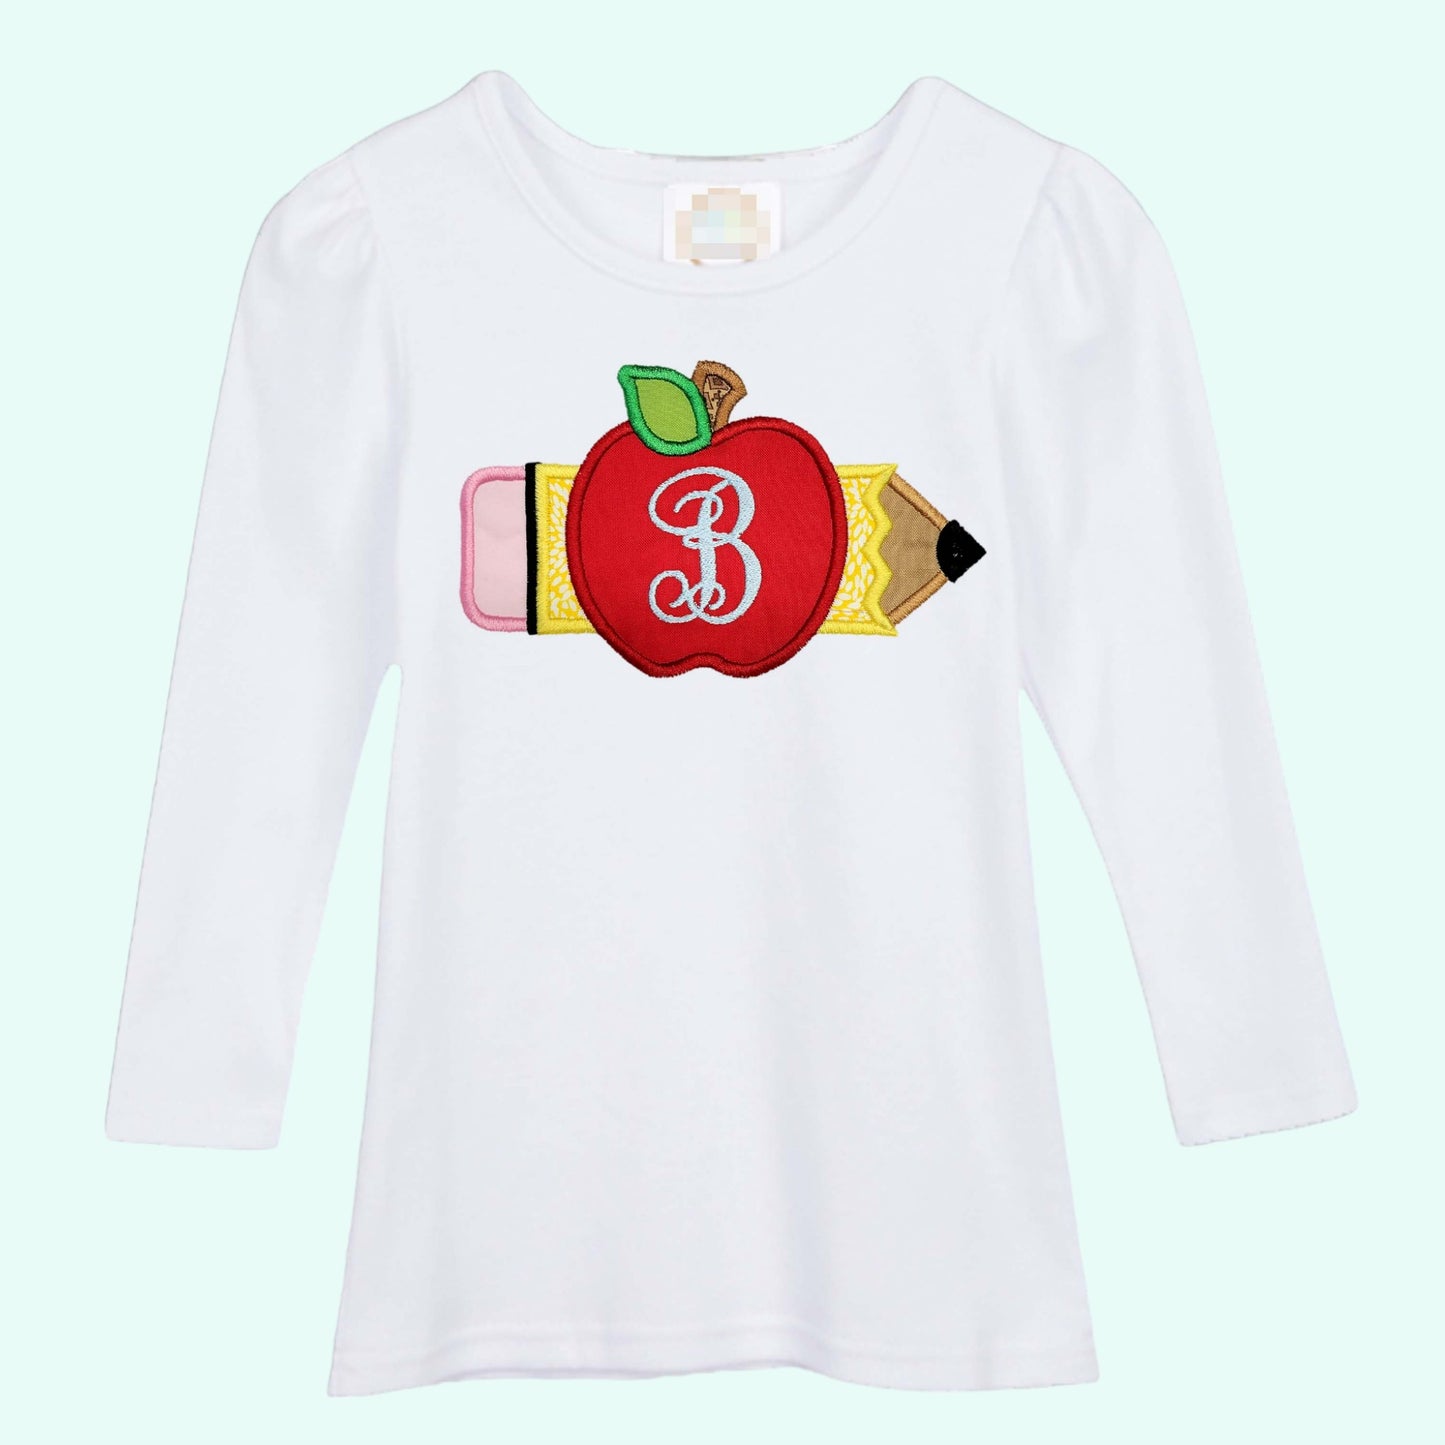 Back to School Shirt | Pencil Monogram Shirt | First Day of Class embroidered T-Shirt